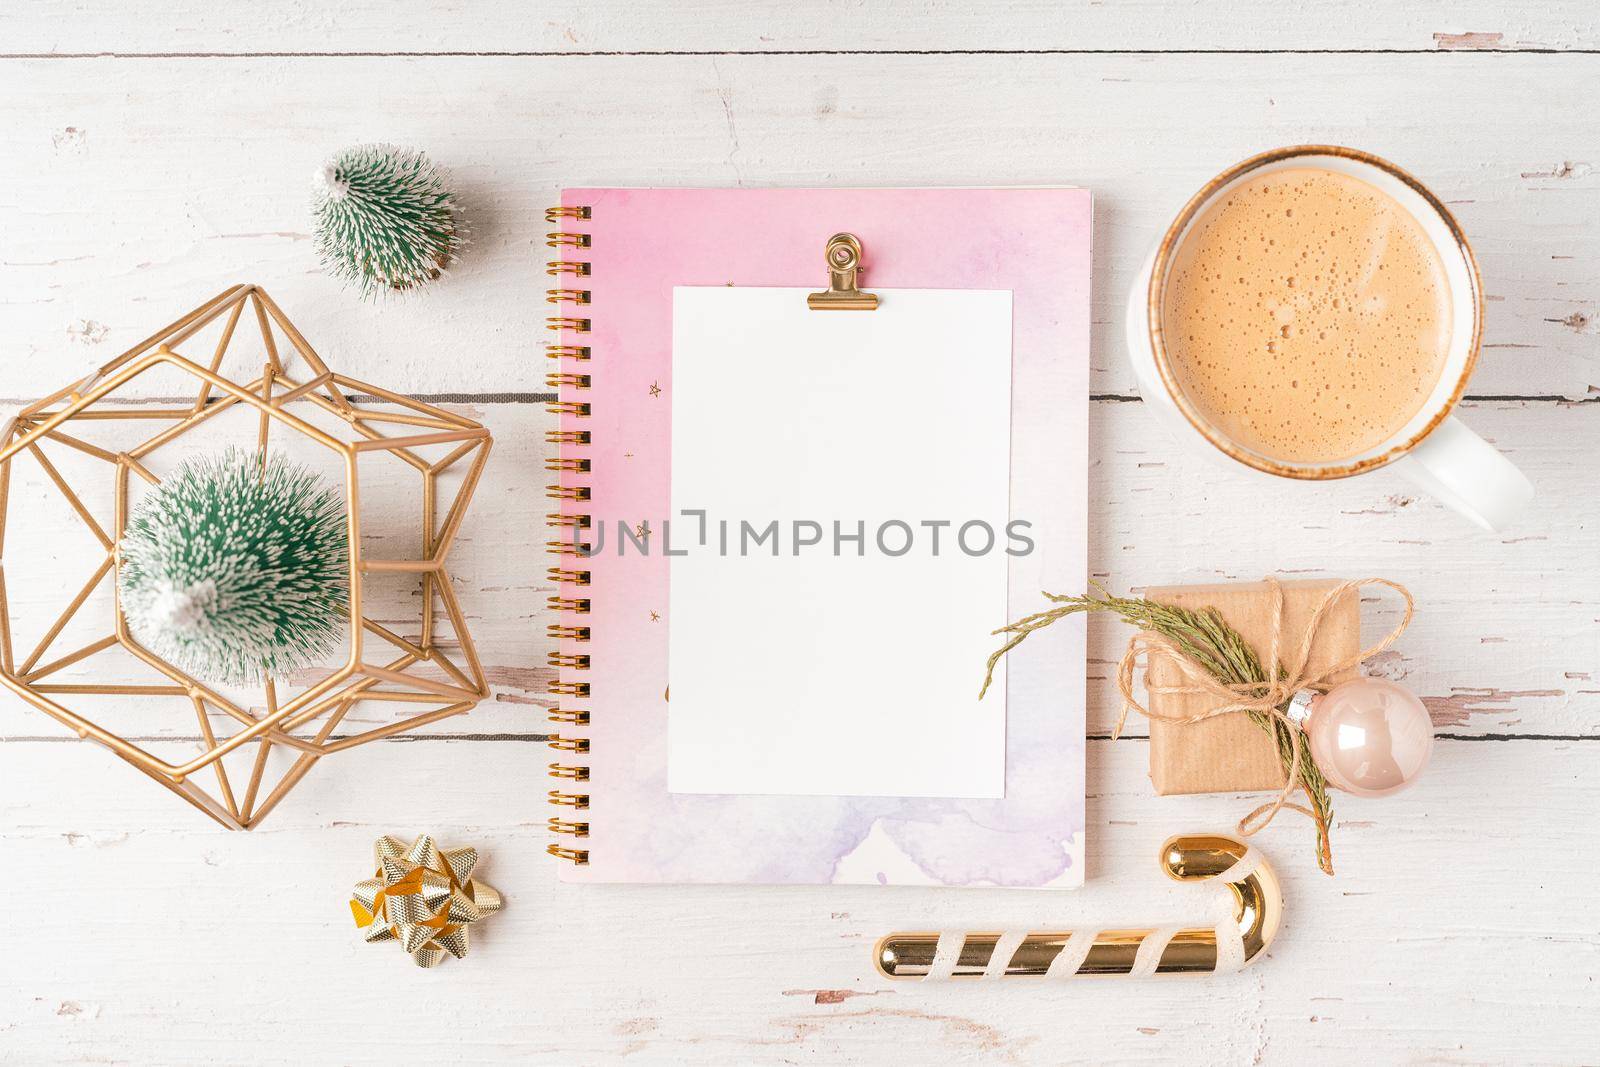 Top view Desktop Christmas notepad with mockup blank paper. Flat lay on white wooden table background with planner, coffee cup, tree brunch, Christmas eco nature decoration, notebook and stationery.